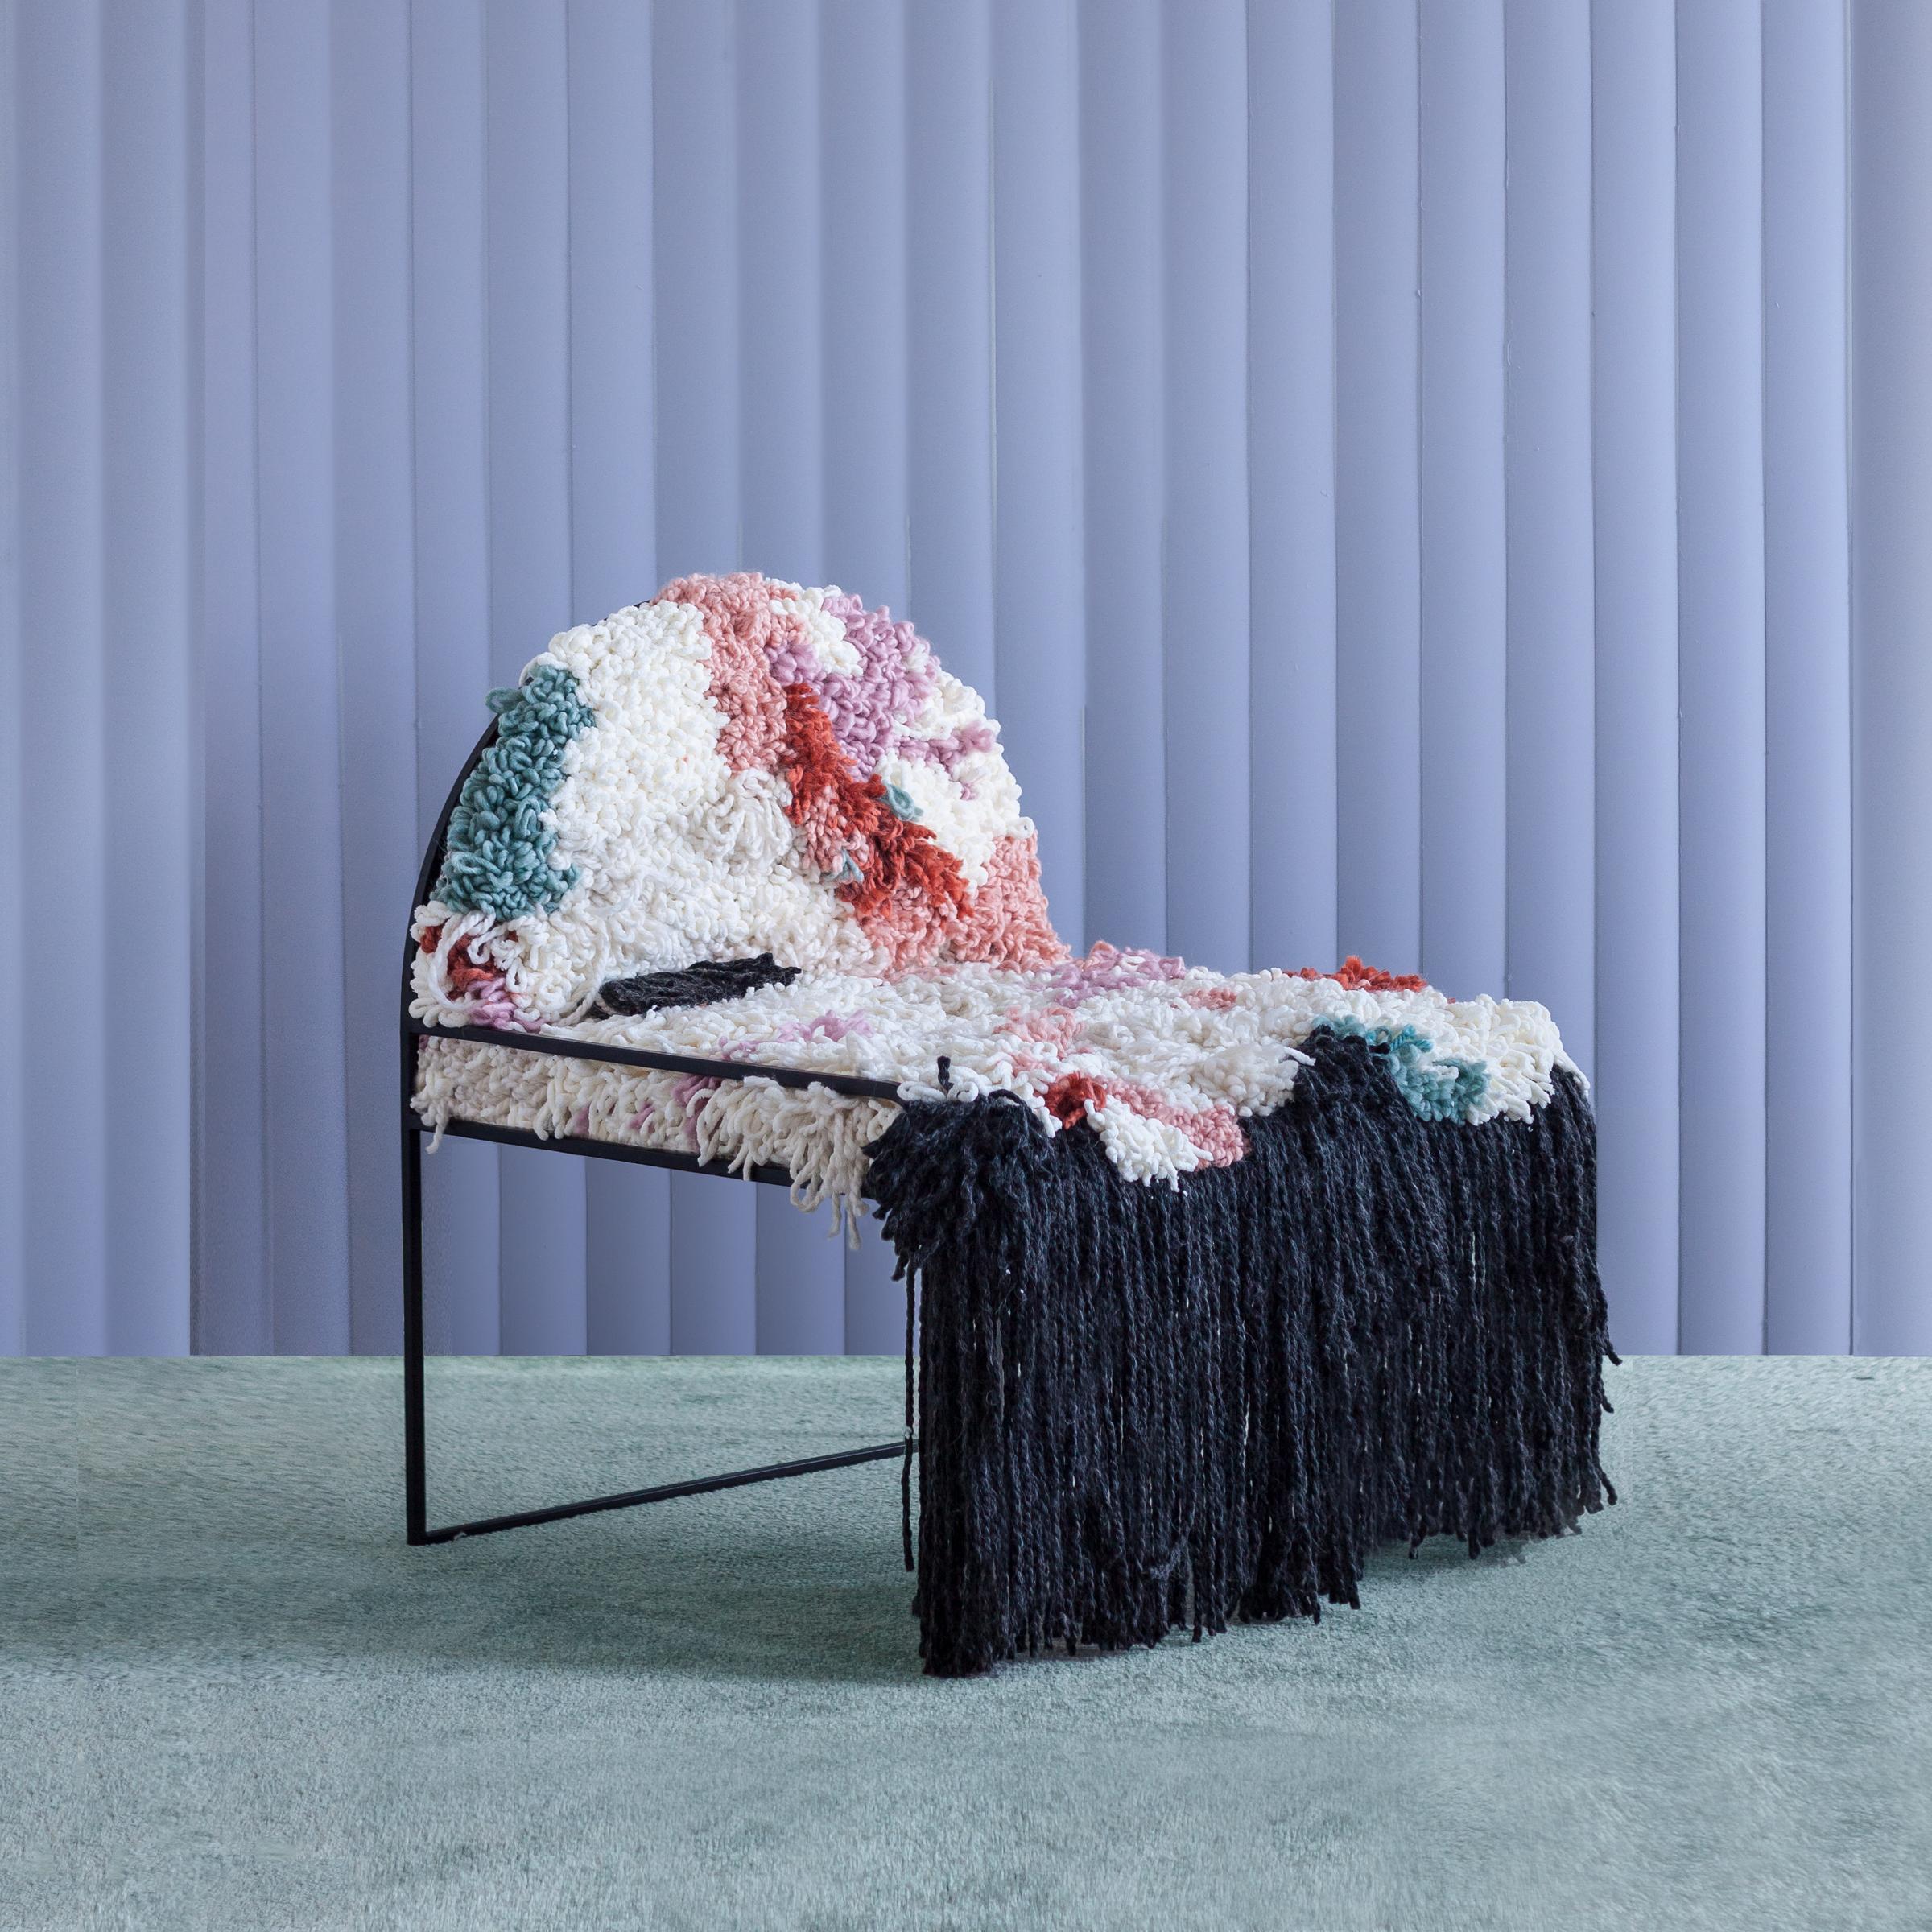 SW Fluffy chair by Soft-geometry
Materials: Handwoven yarn, stainless steel
Dimensions: 26 x 26 x 30” H

Chair dressed in a handwoven fluffy yarn seat on a simple arched frame in stainless steel. Each woven seat composition is abstract and